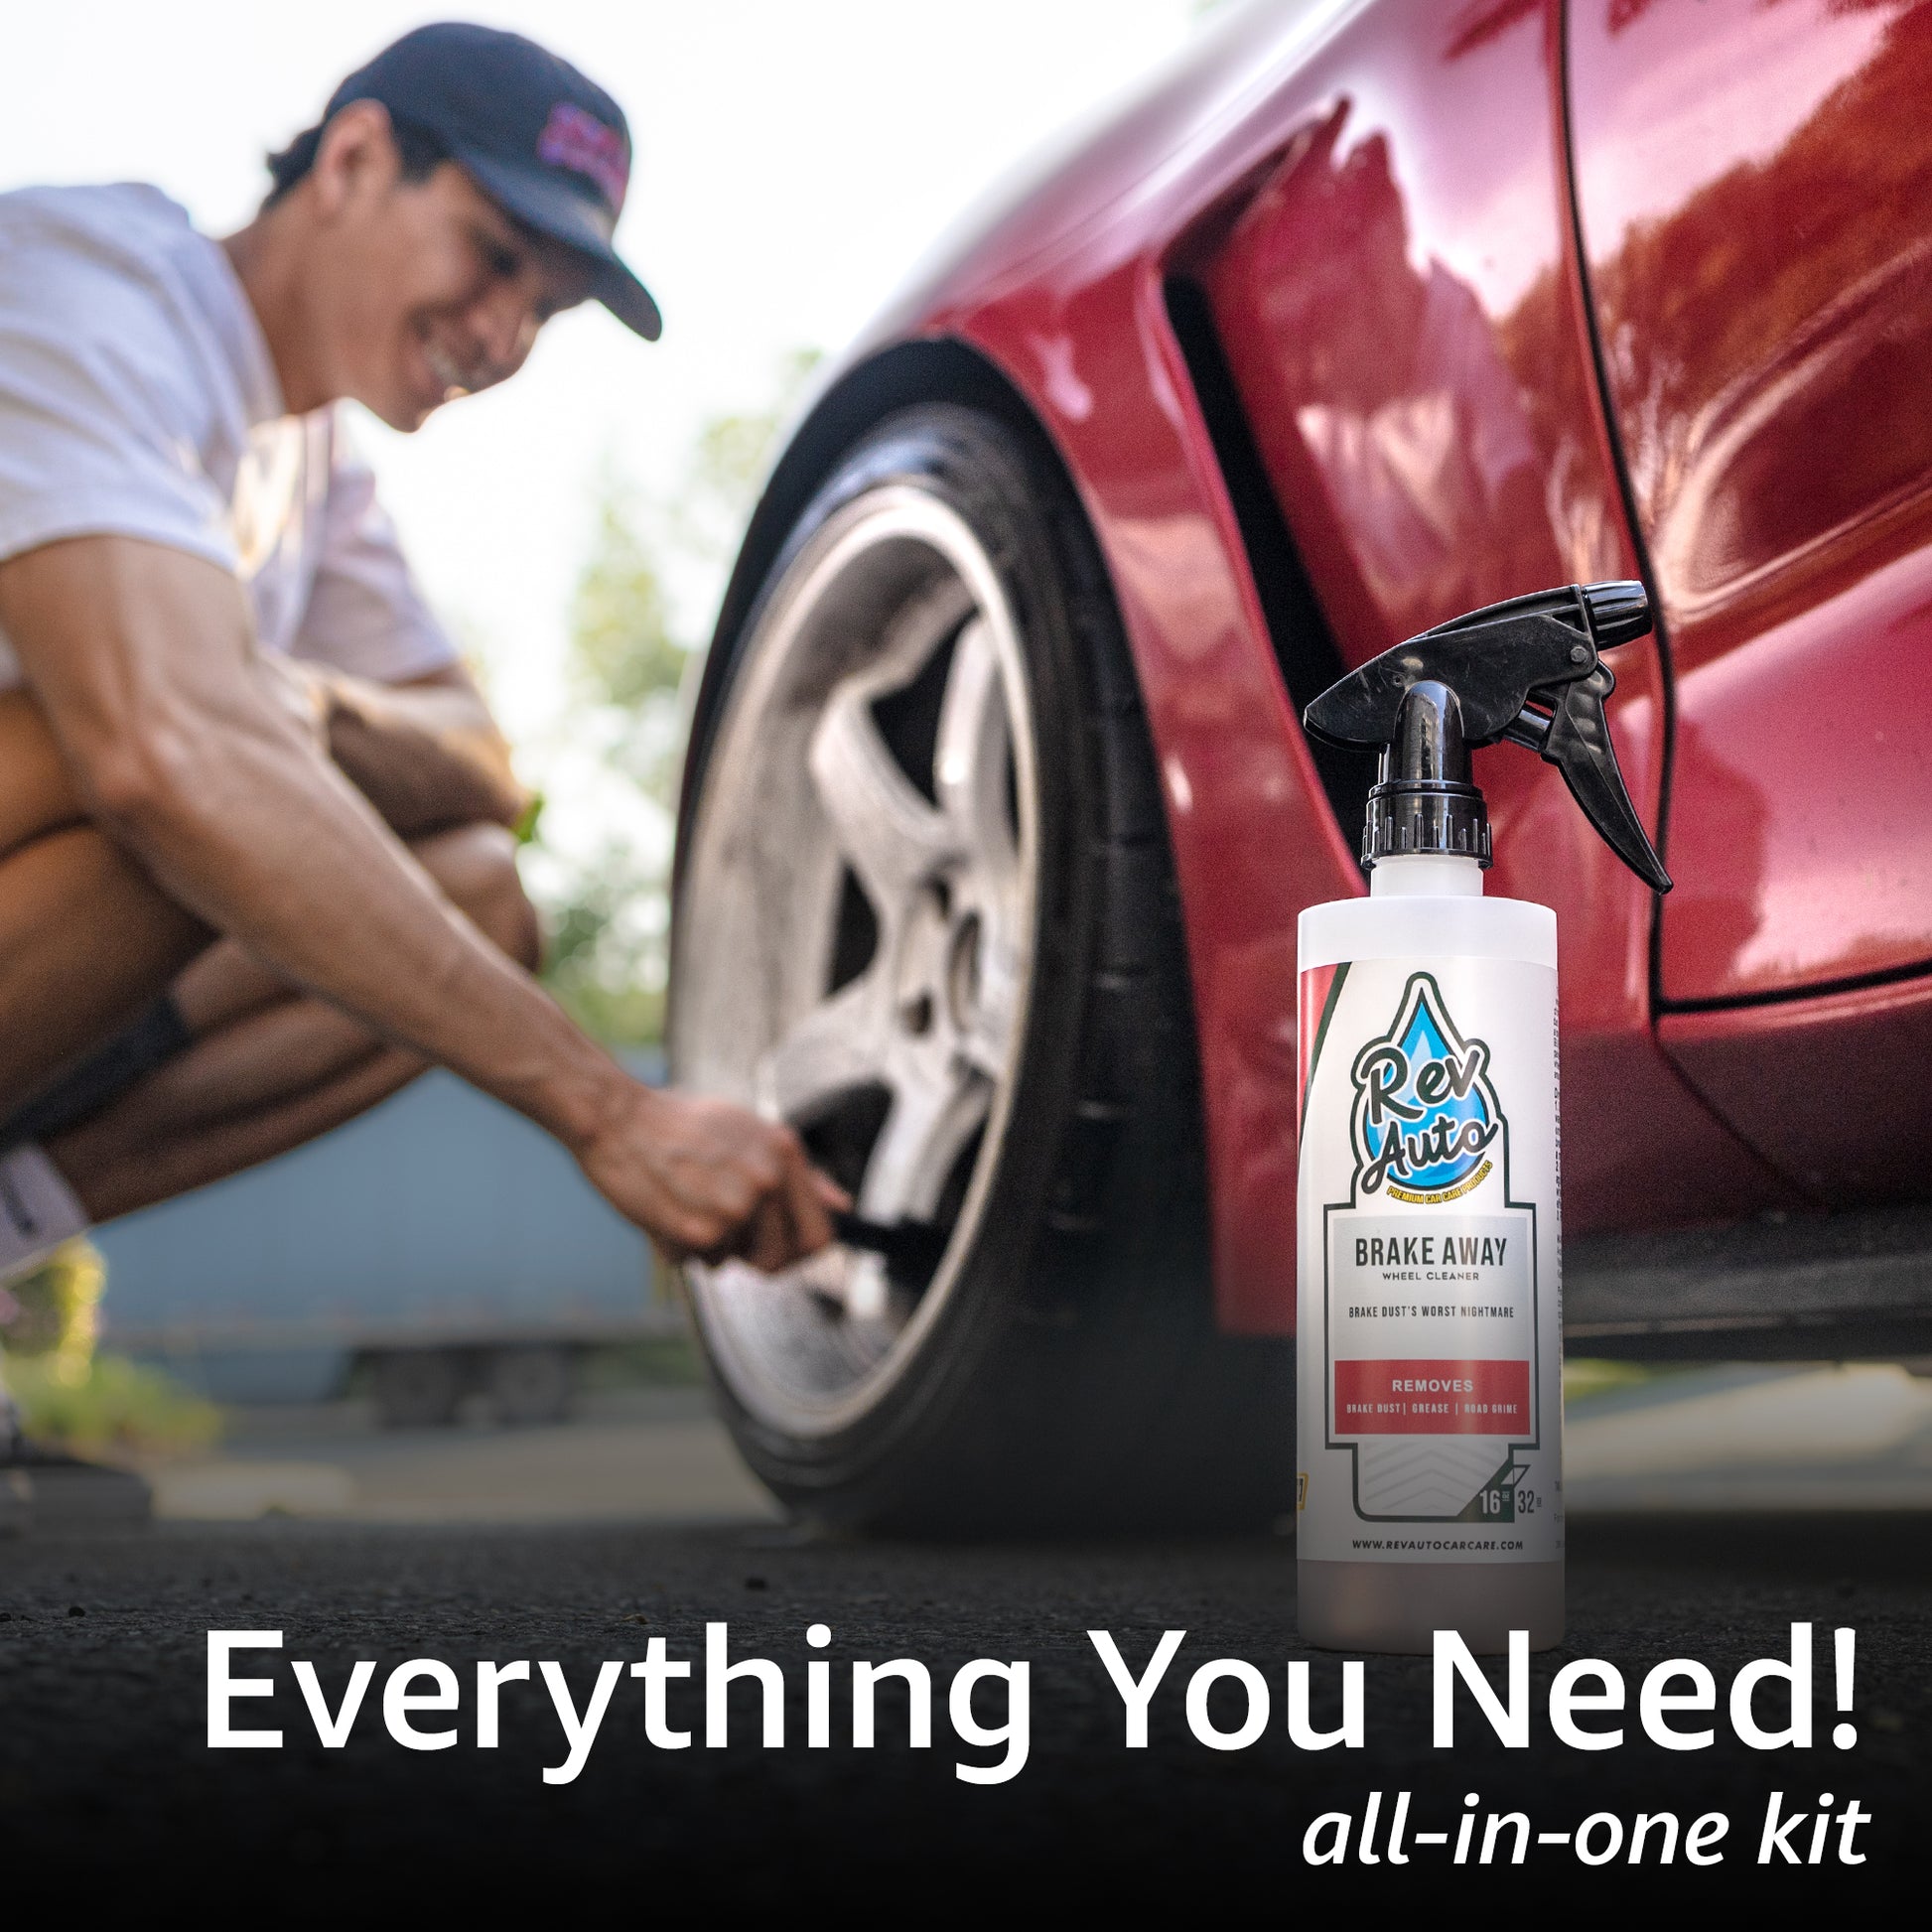 Adam's Wheel & Tire Detailing Bundle - Complete Cleaning Kit of Wheel  Detailing Accessories to Clean Your Wheels & Dress Your Tires (Complete Kit)